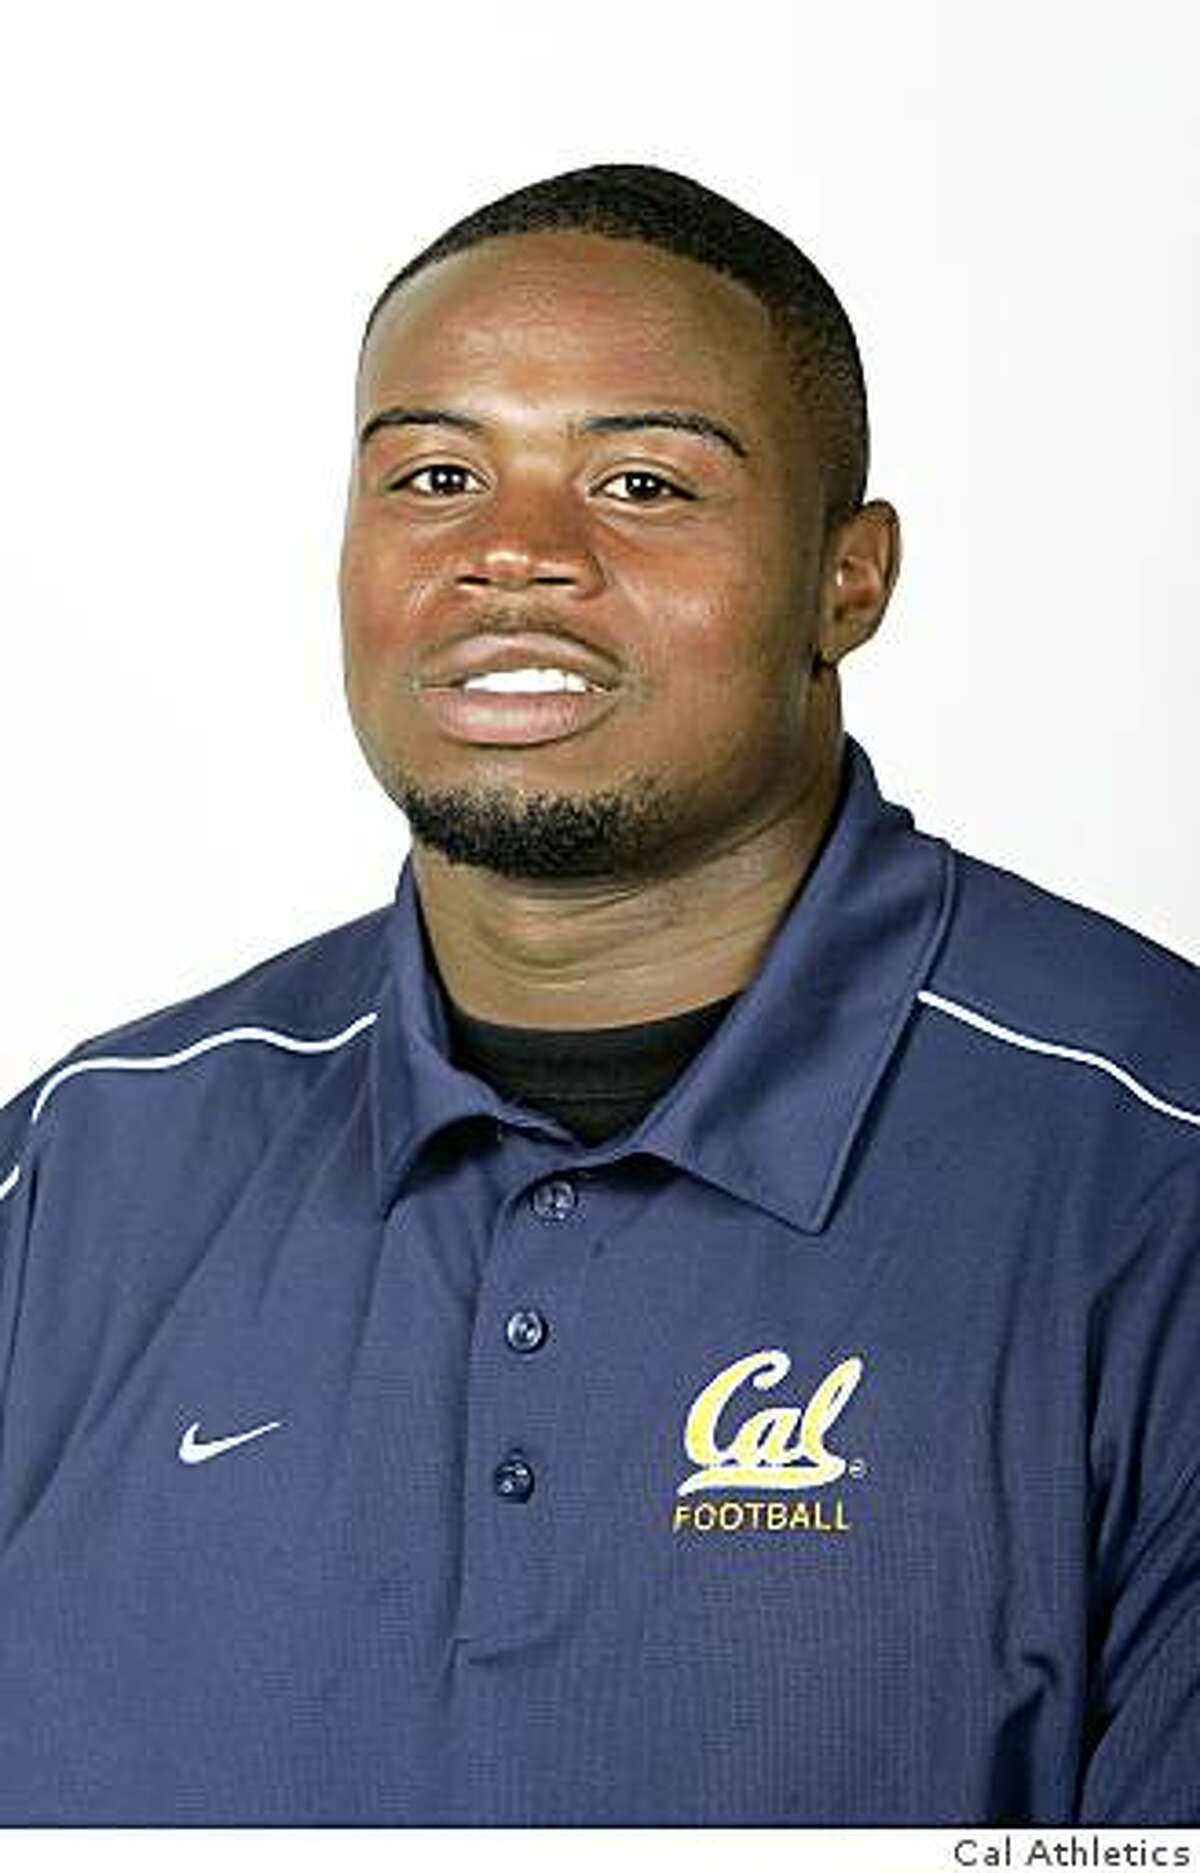 R.J. Garrett, a 21-year-old Cal football player, was arrested and charged October 20, 2008 in connection with a September 2008 robbery of two Cal crew members at the Clark Kerr Campus, a residence-hall complex just southeast of UC Berkeley and home to many of the school's student athletes.